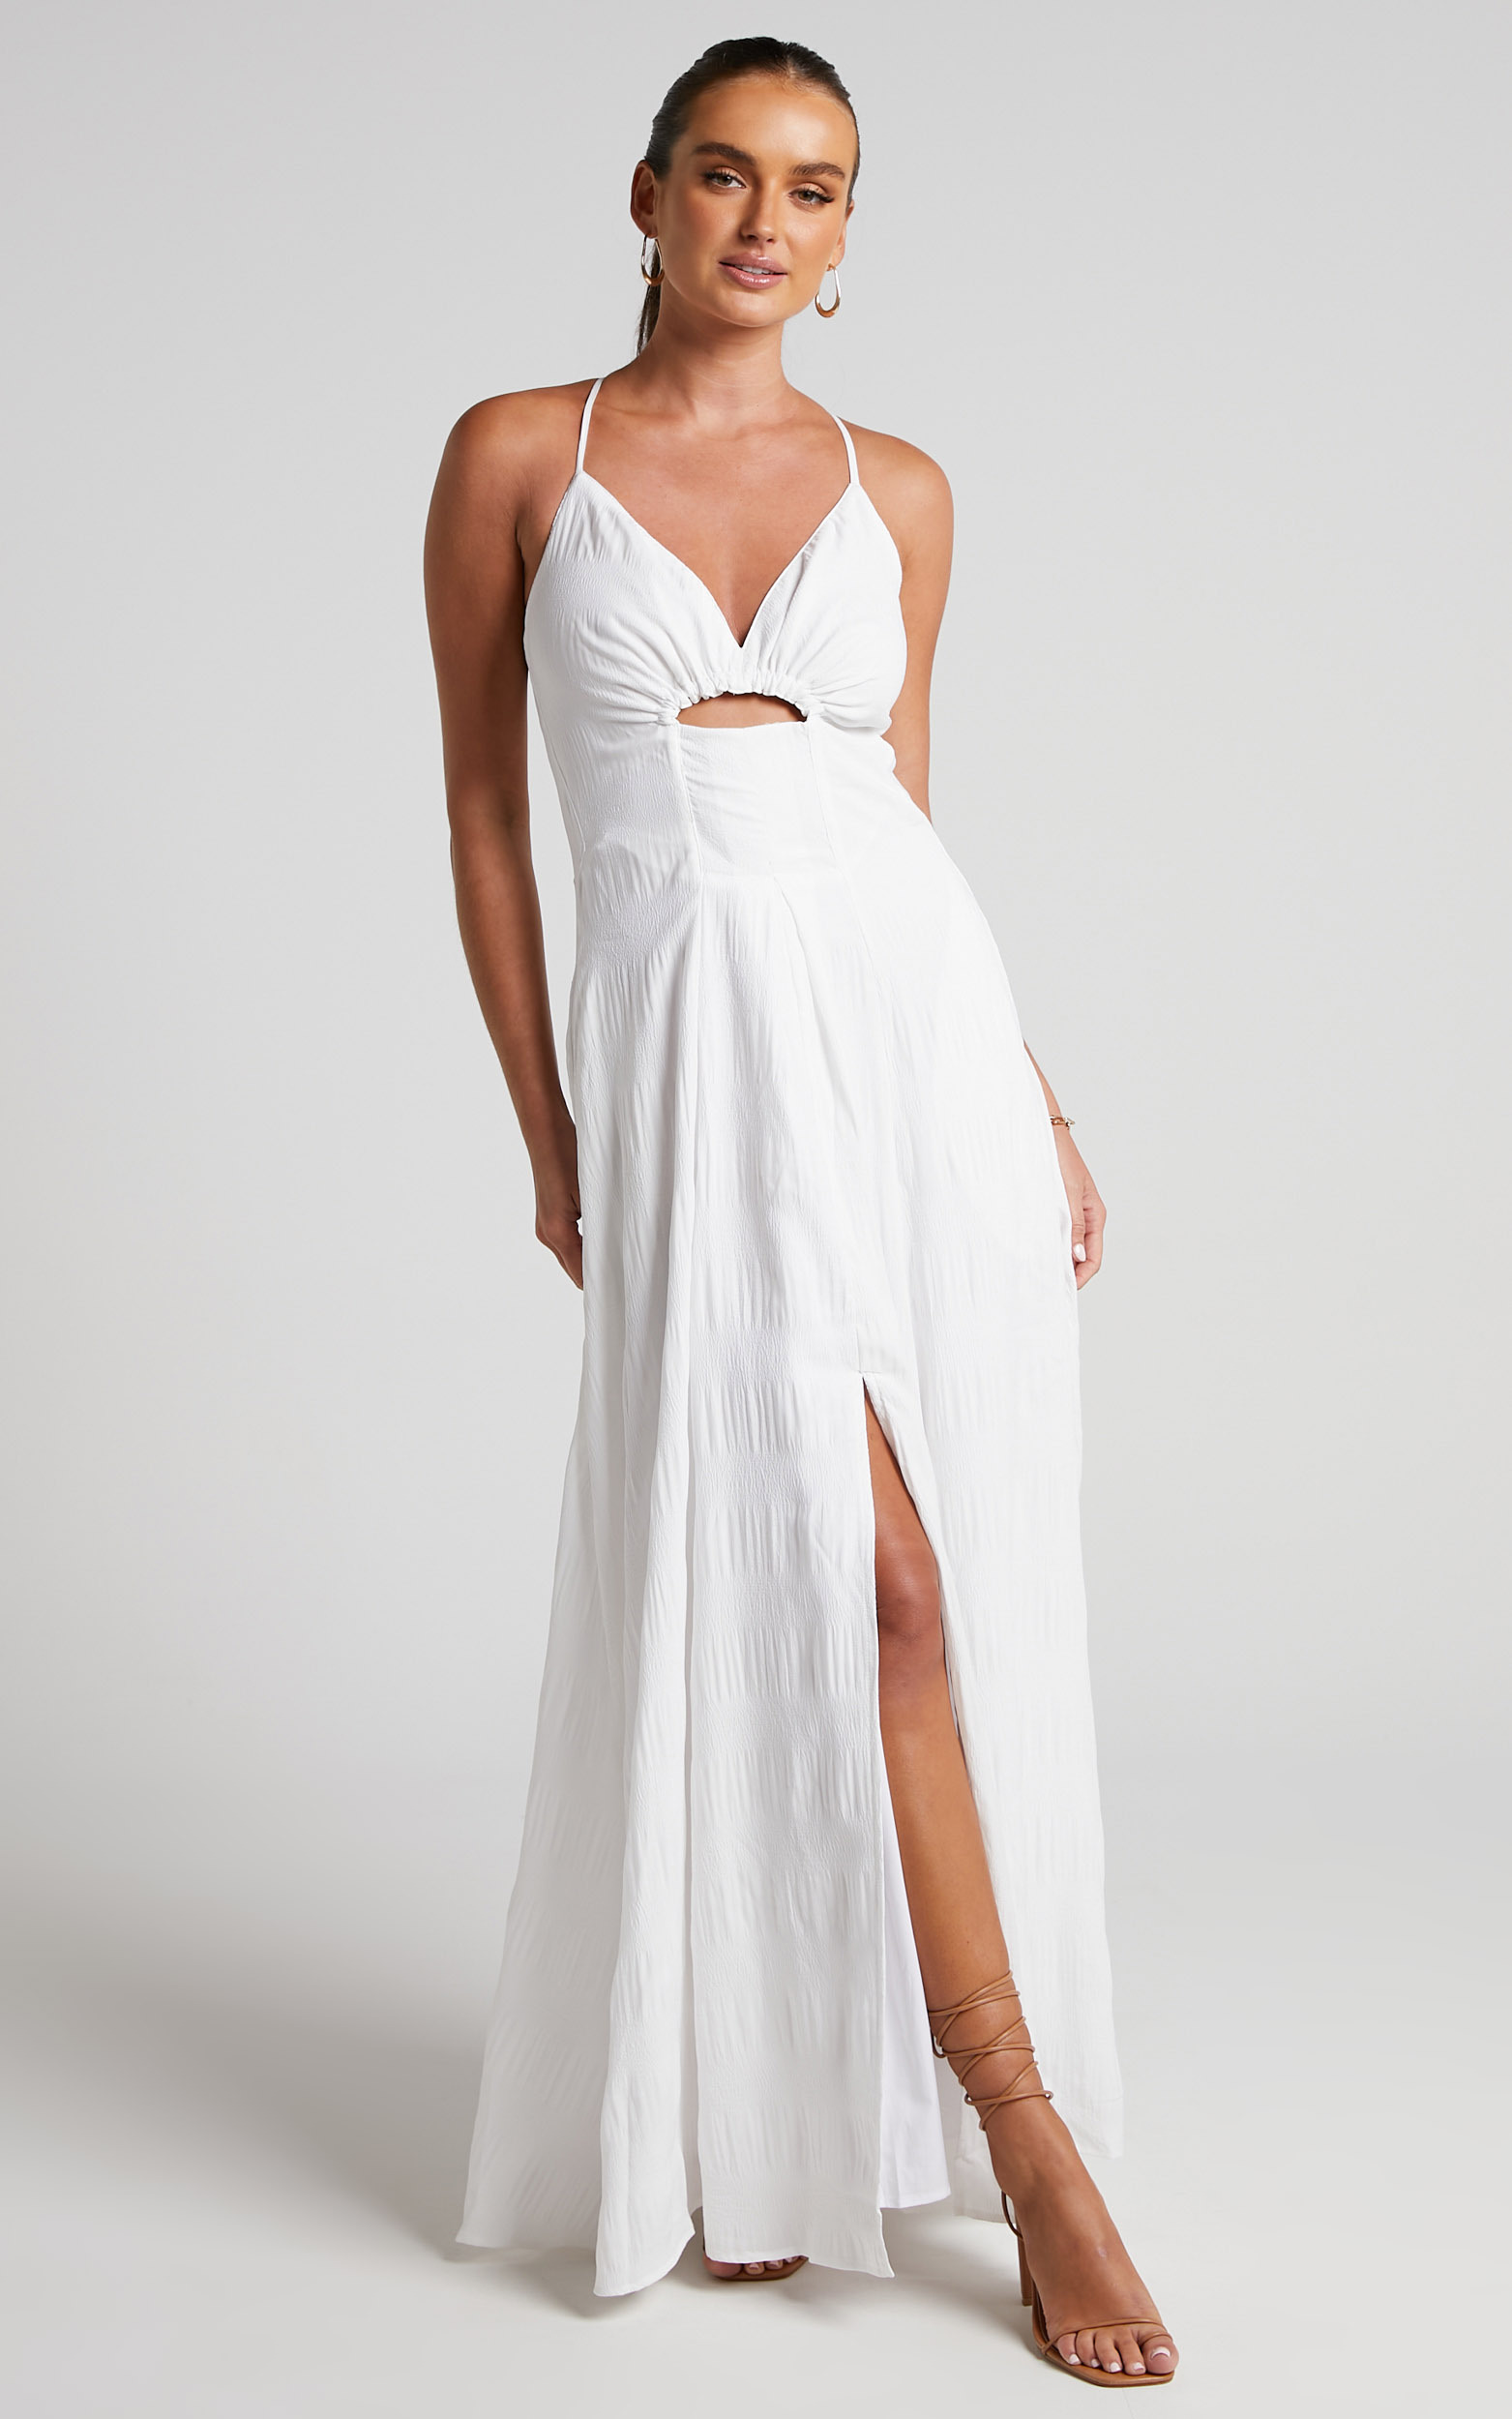 Marisse Maxi Dress - Cut Out Front Split Cross Back Textured Dress in White - 06, WHT2, hi-res image number null